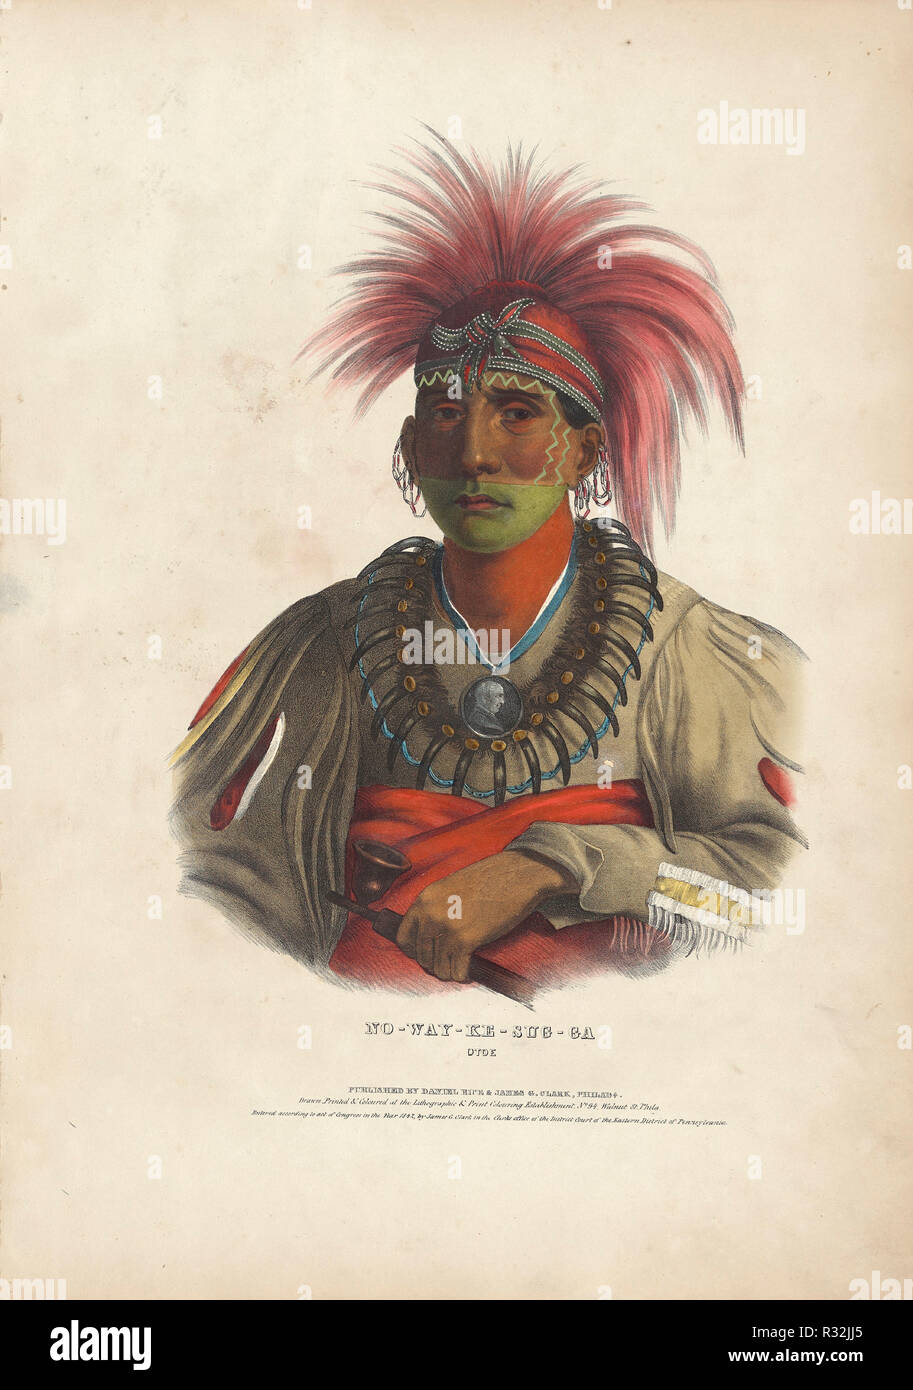 No-Way-Ke-Sug-Ga, Otoe. Dated: 1842. Dimensions: sheet: 46.99 × 33.97 cm (18 1/2 × 13 3/8 in.). Medium: lithograph in black with watercolor additions on wove paper. Museum: National Gallery of Art, Washington DC. Author: Charles Bird King. Stock Photo